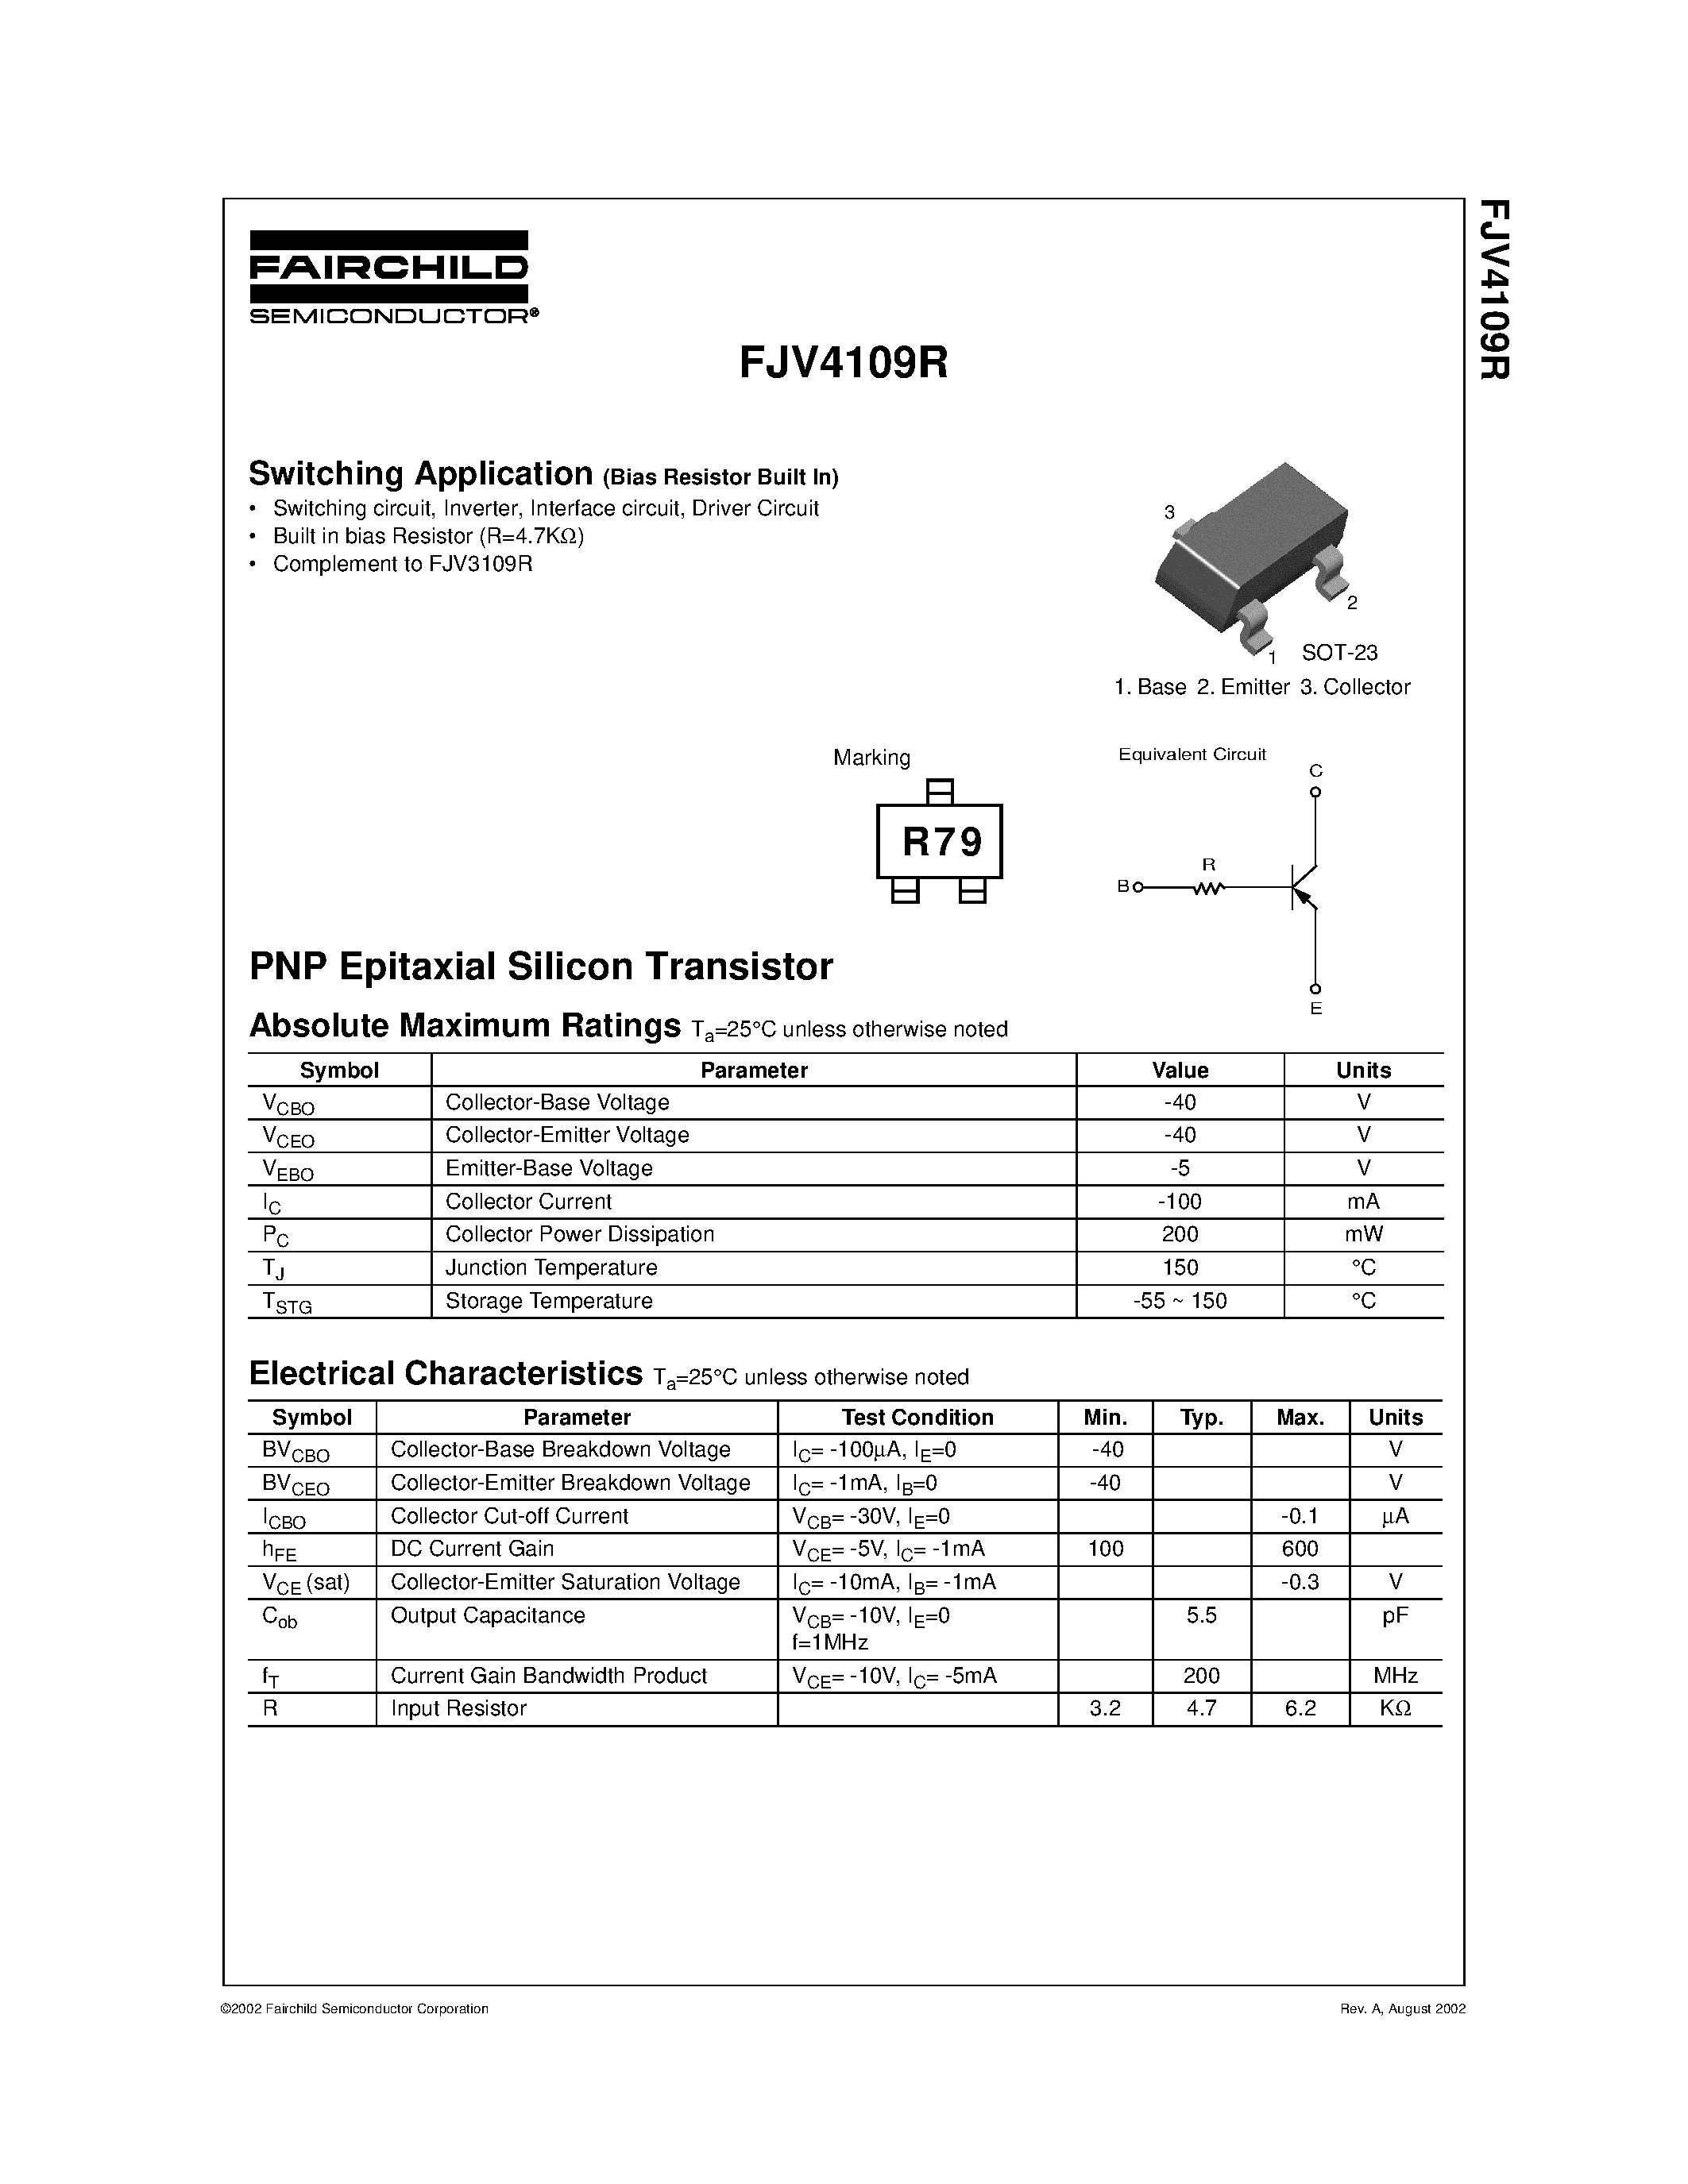 Даташит FJV4109R - PNP Epitaxial Silicon Transistor страница 1